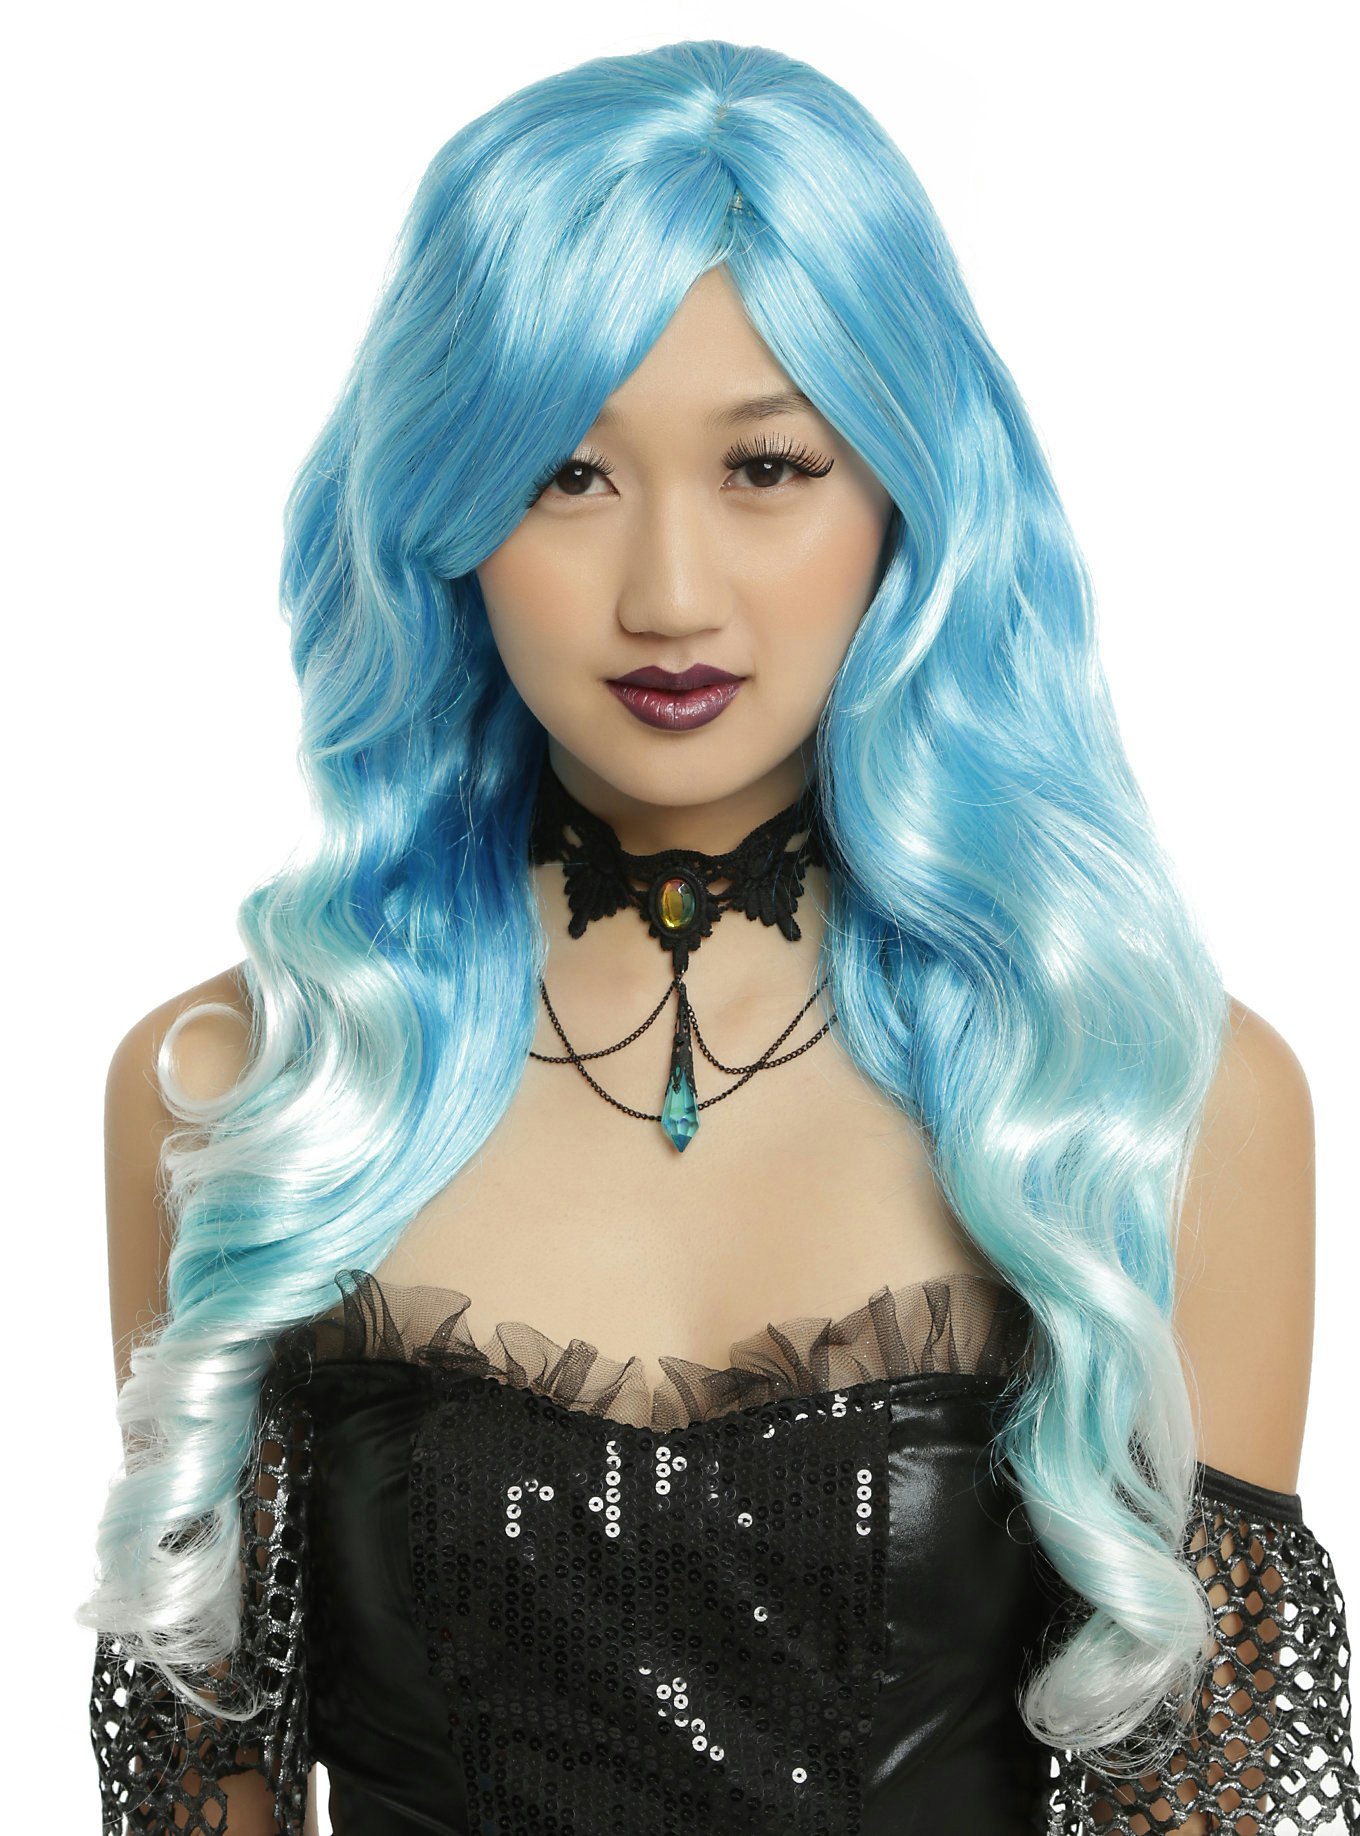 11 Of The Coolest Blue Halloween Wigs To Give You Some Costume Ideas For 2016 Photos